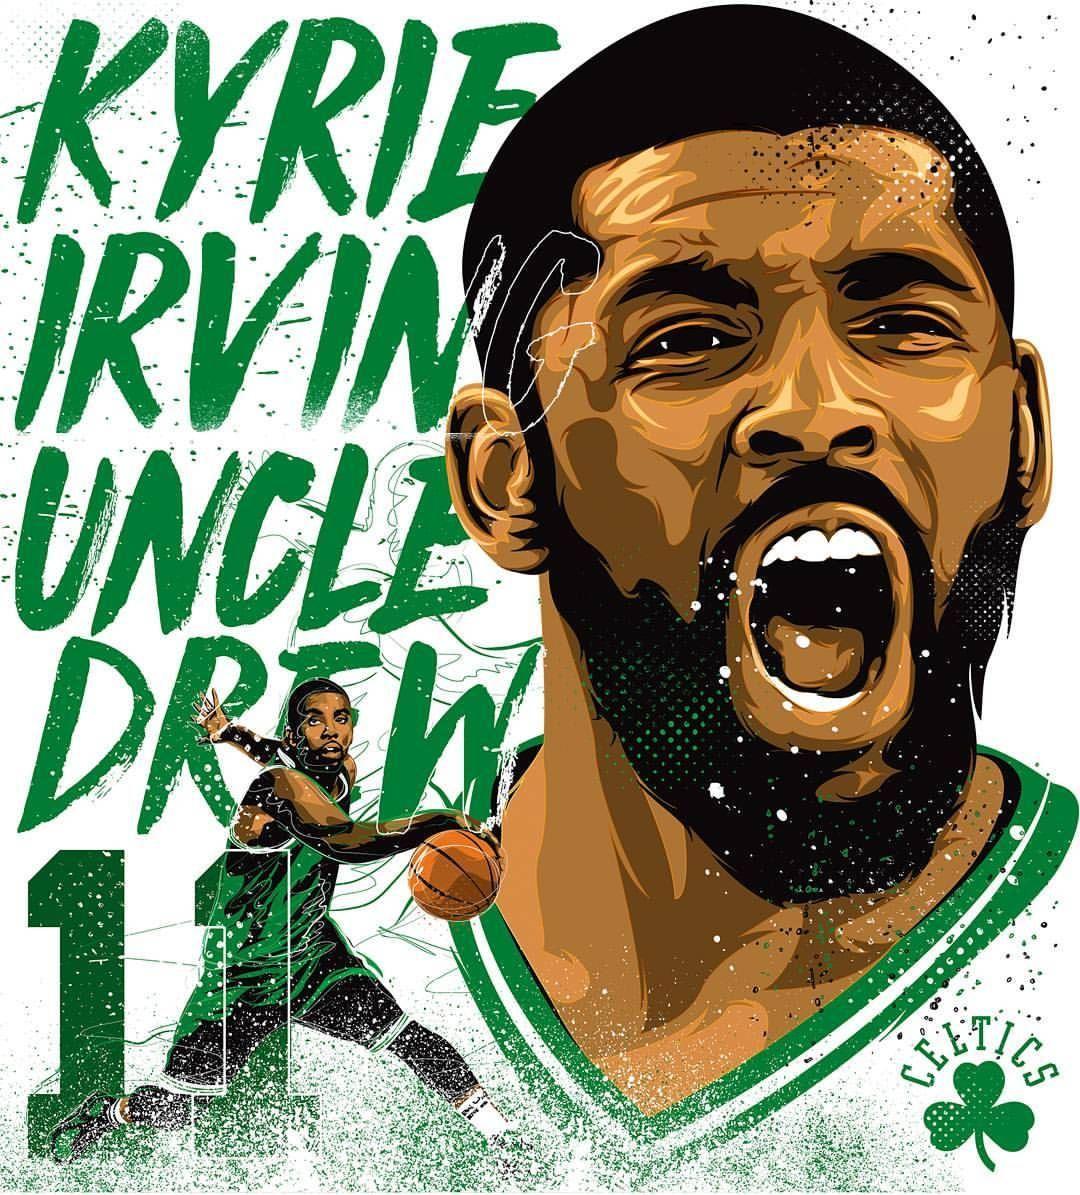 Kyrie Irving. Kyrie irving